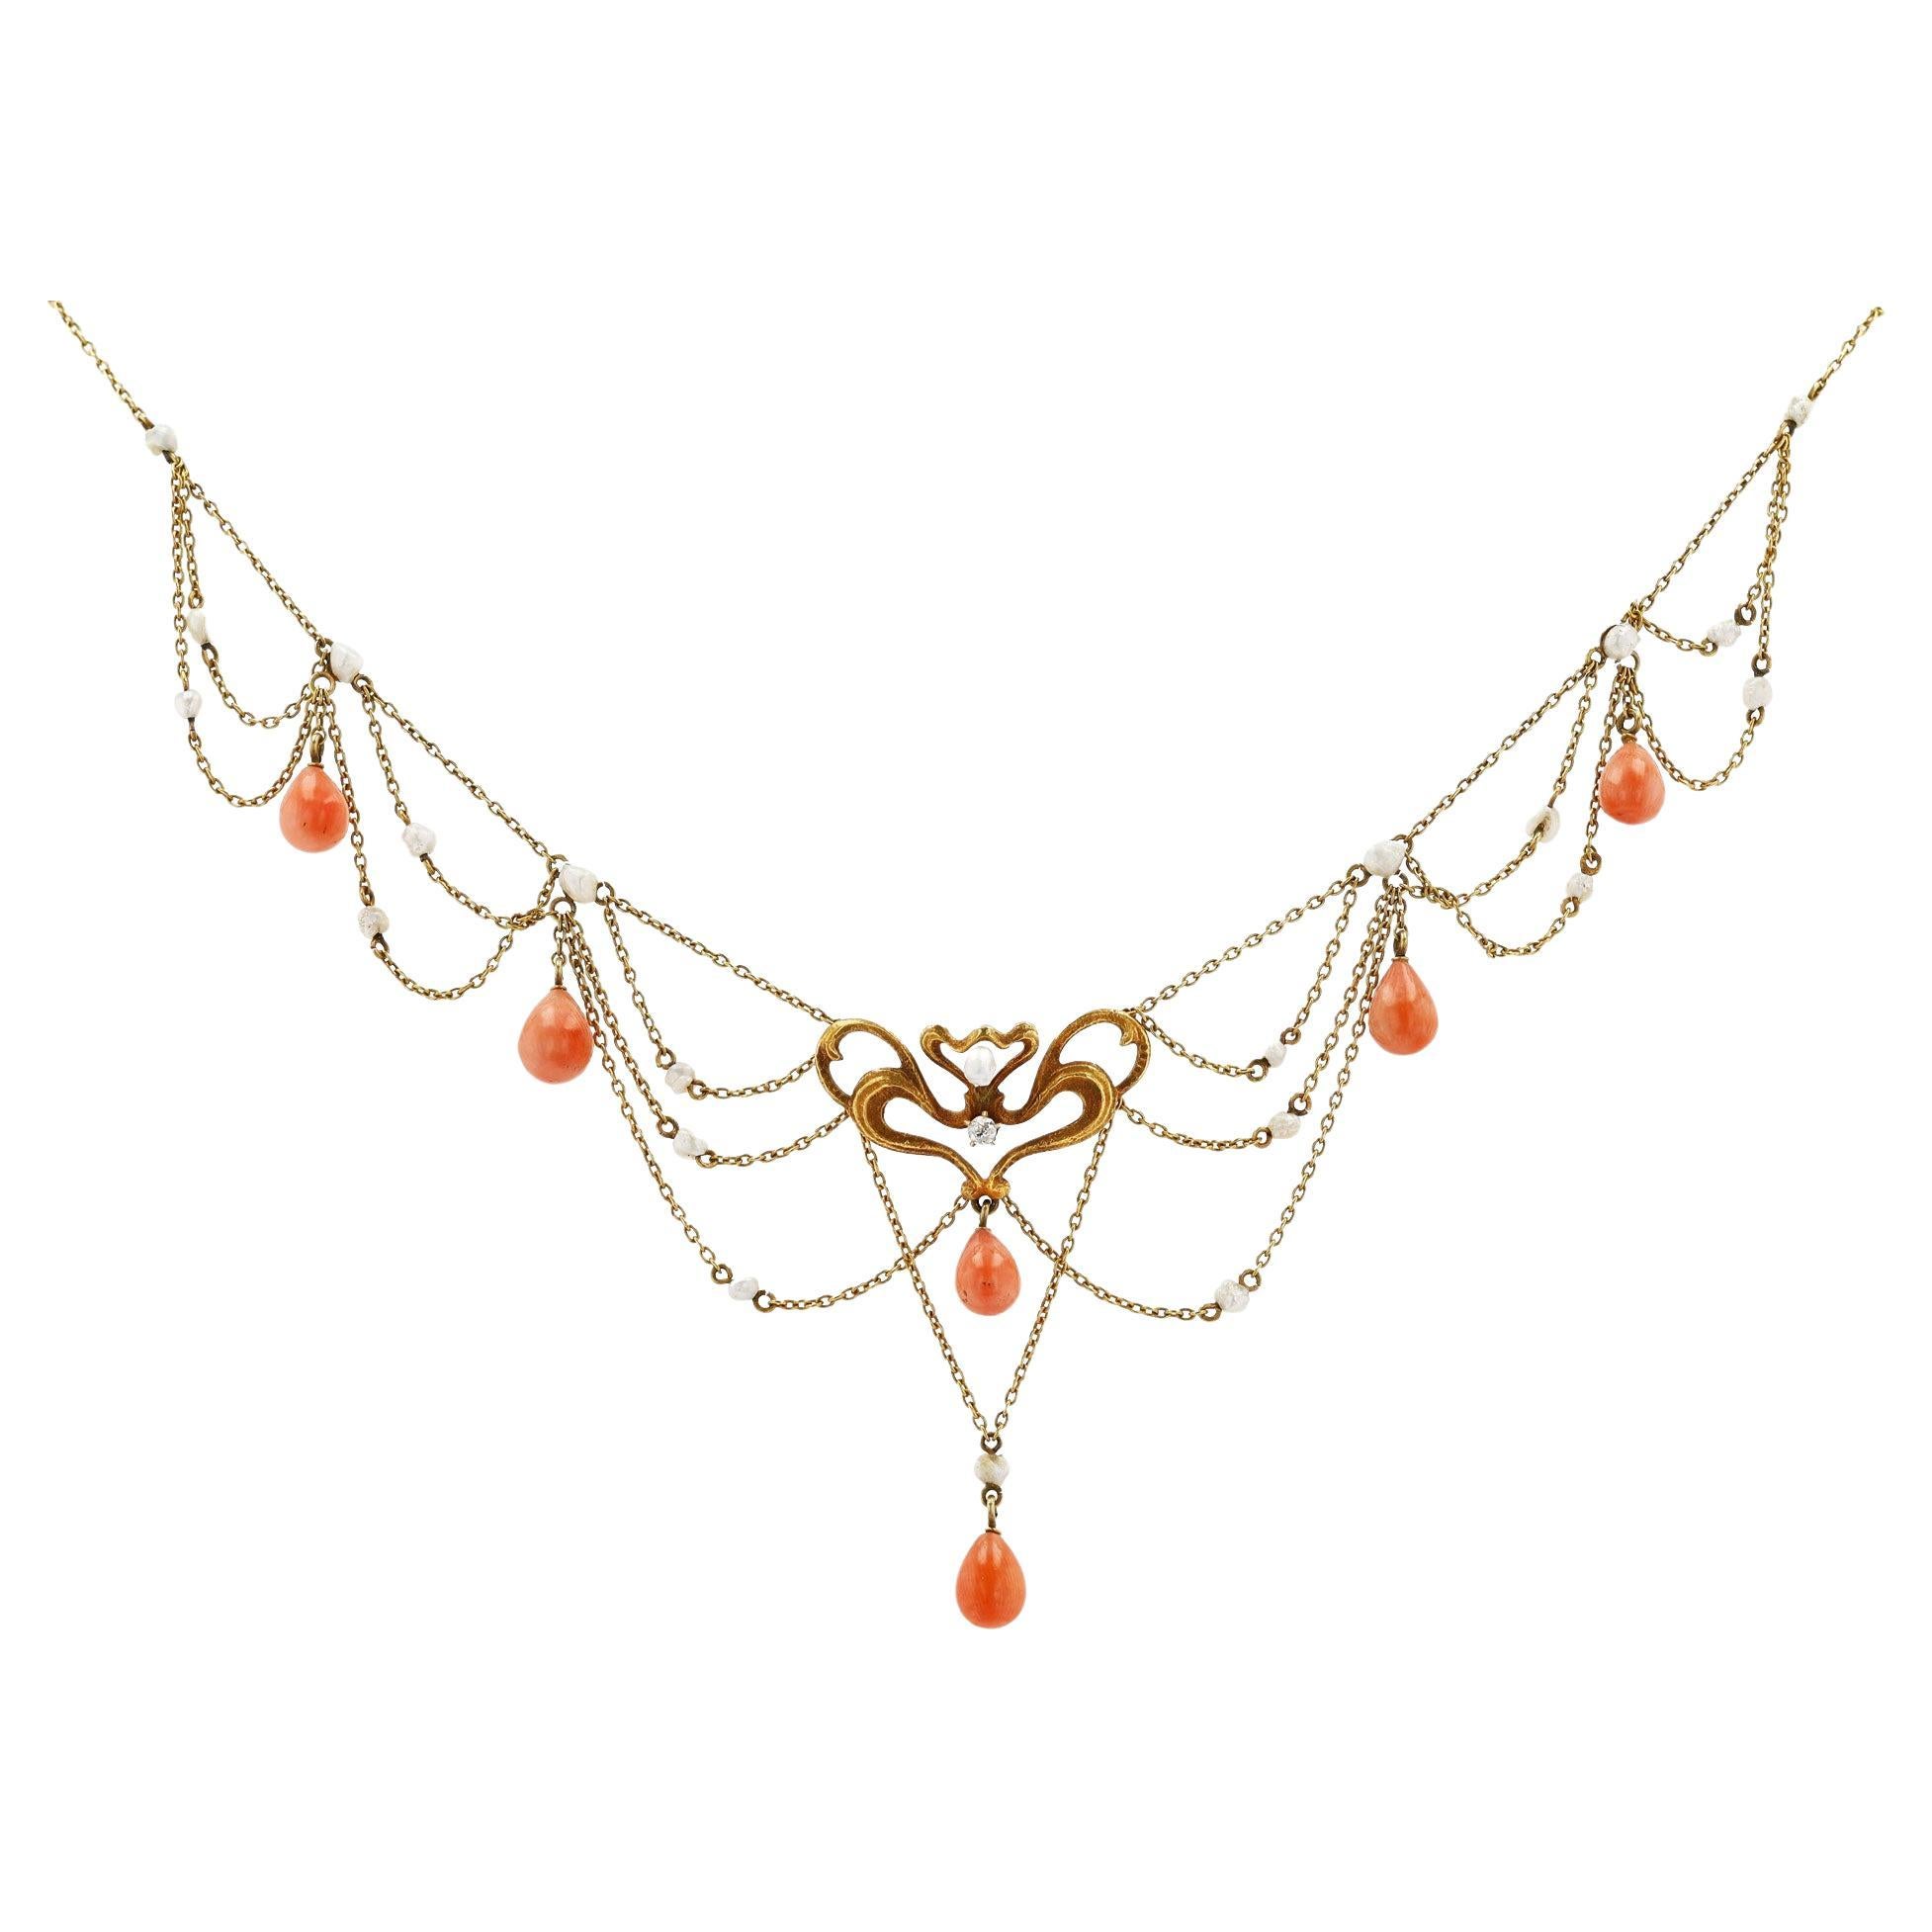 Art Nouveau Coral and Seed Pearl Festoon Bib Necklace